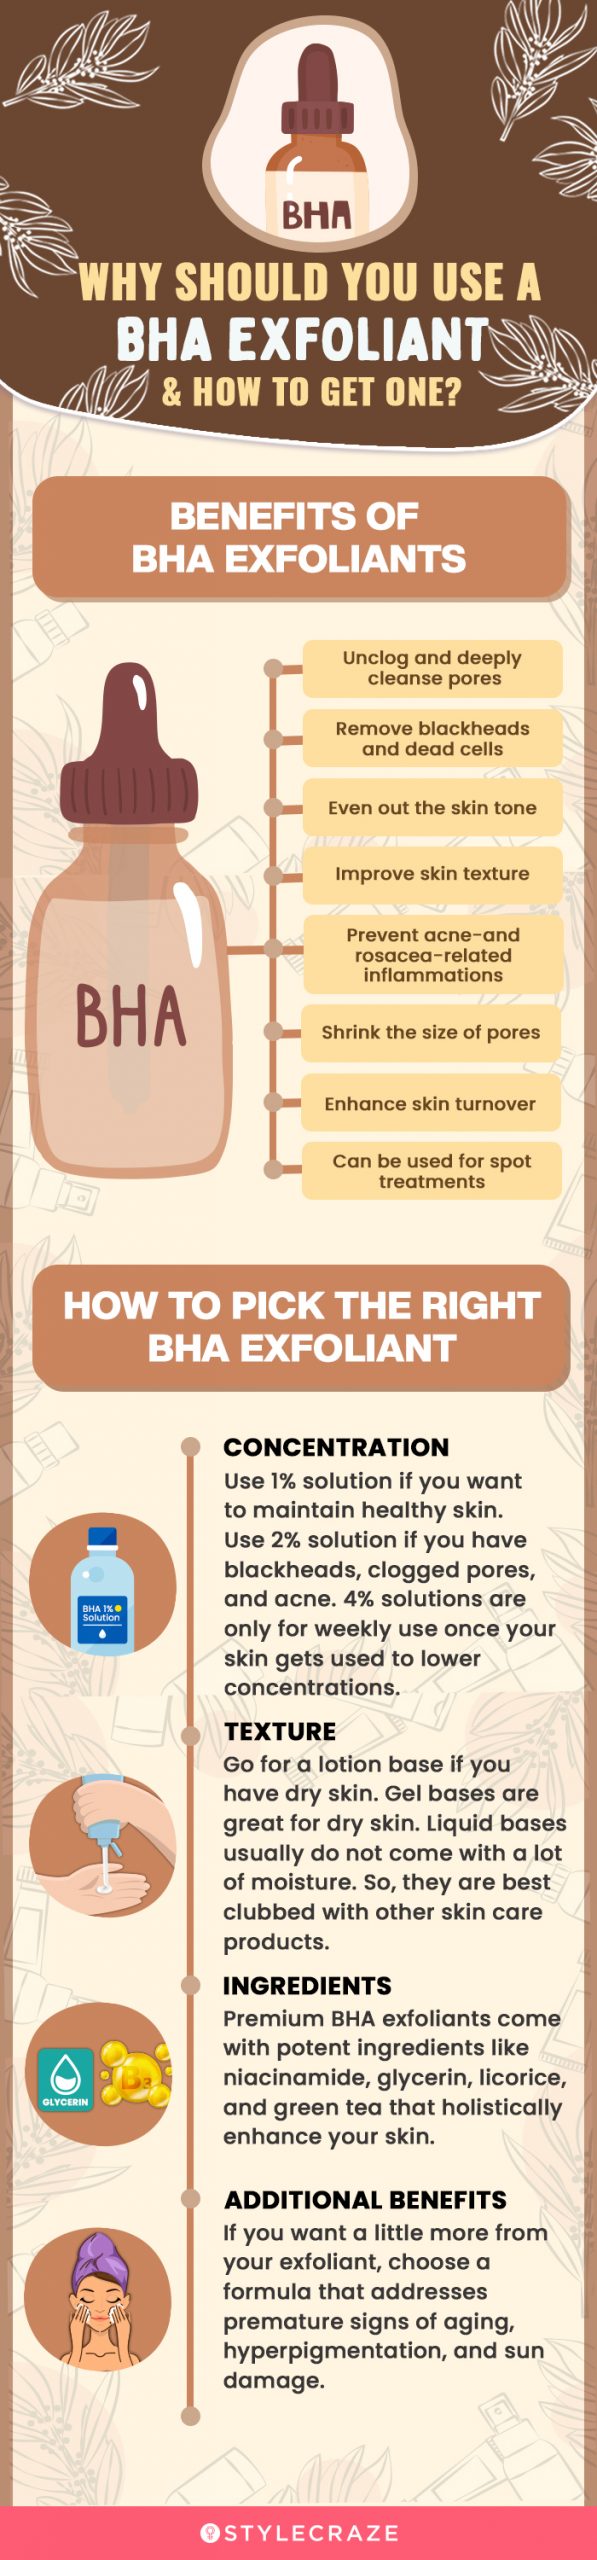 Why Should You Use A BHA Exfoliant & How To Get One? (infographic)